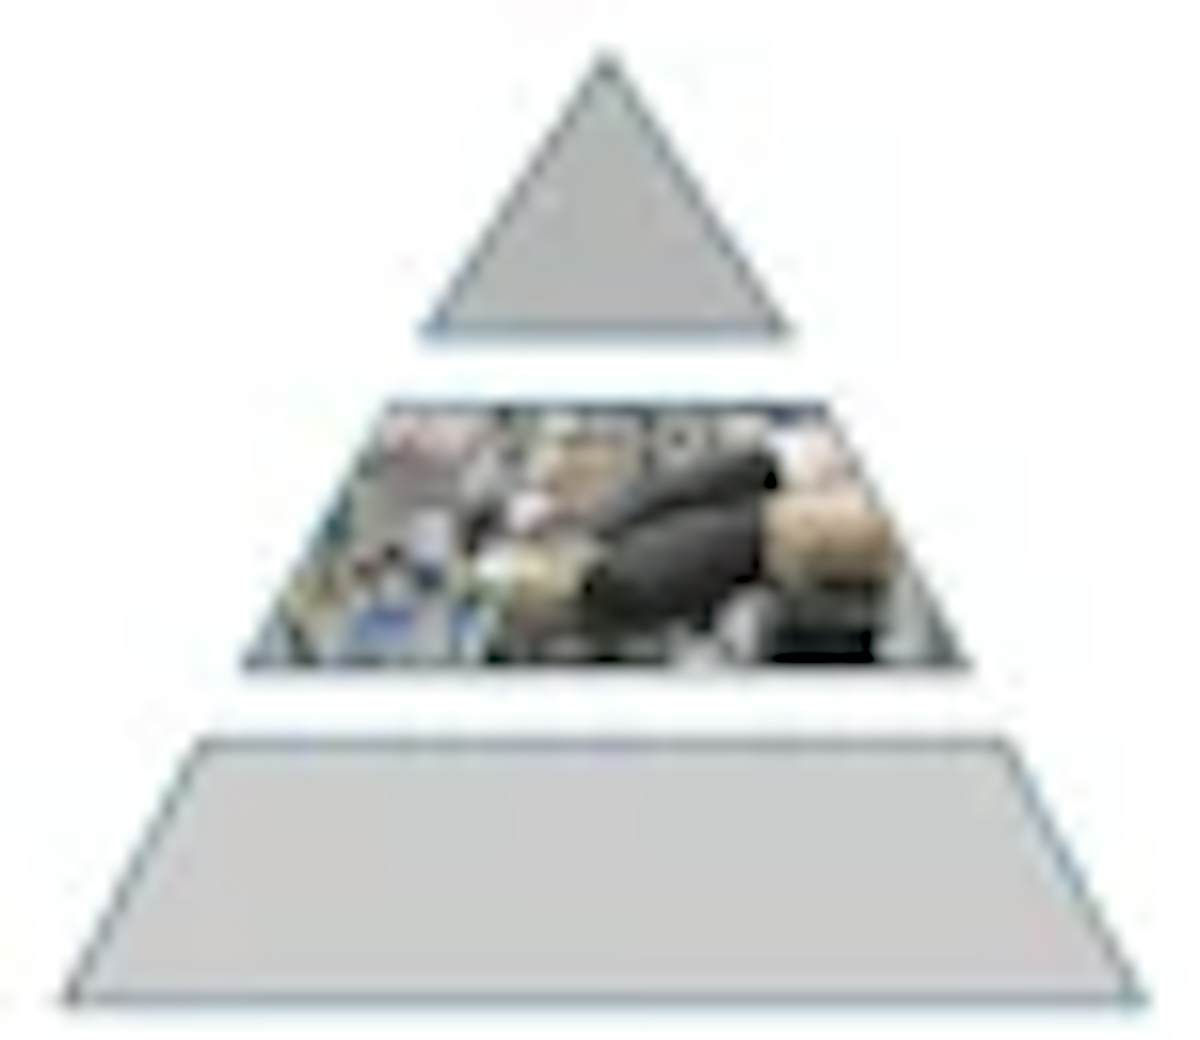 Pyramid with middle piece represented by a factory floor